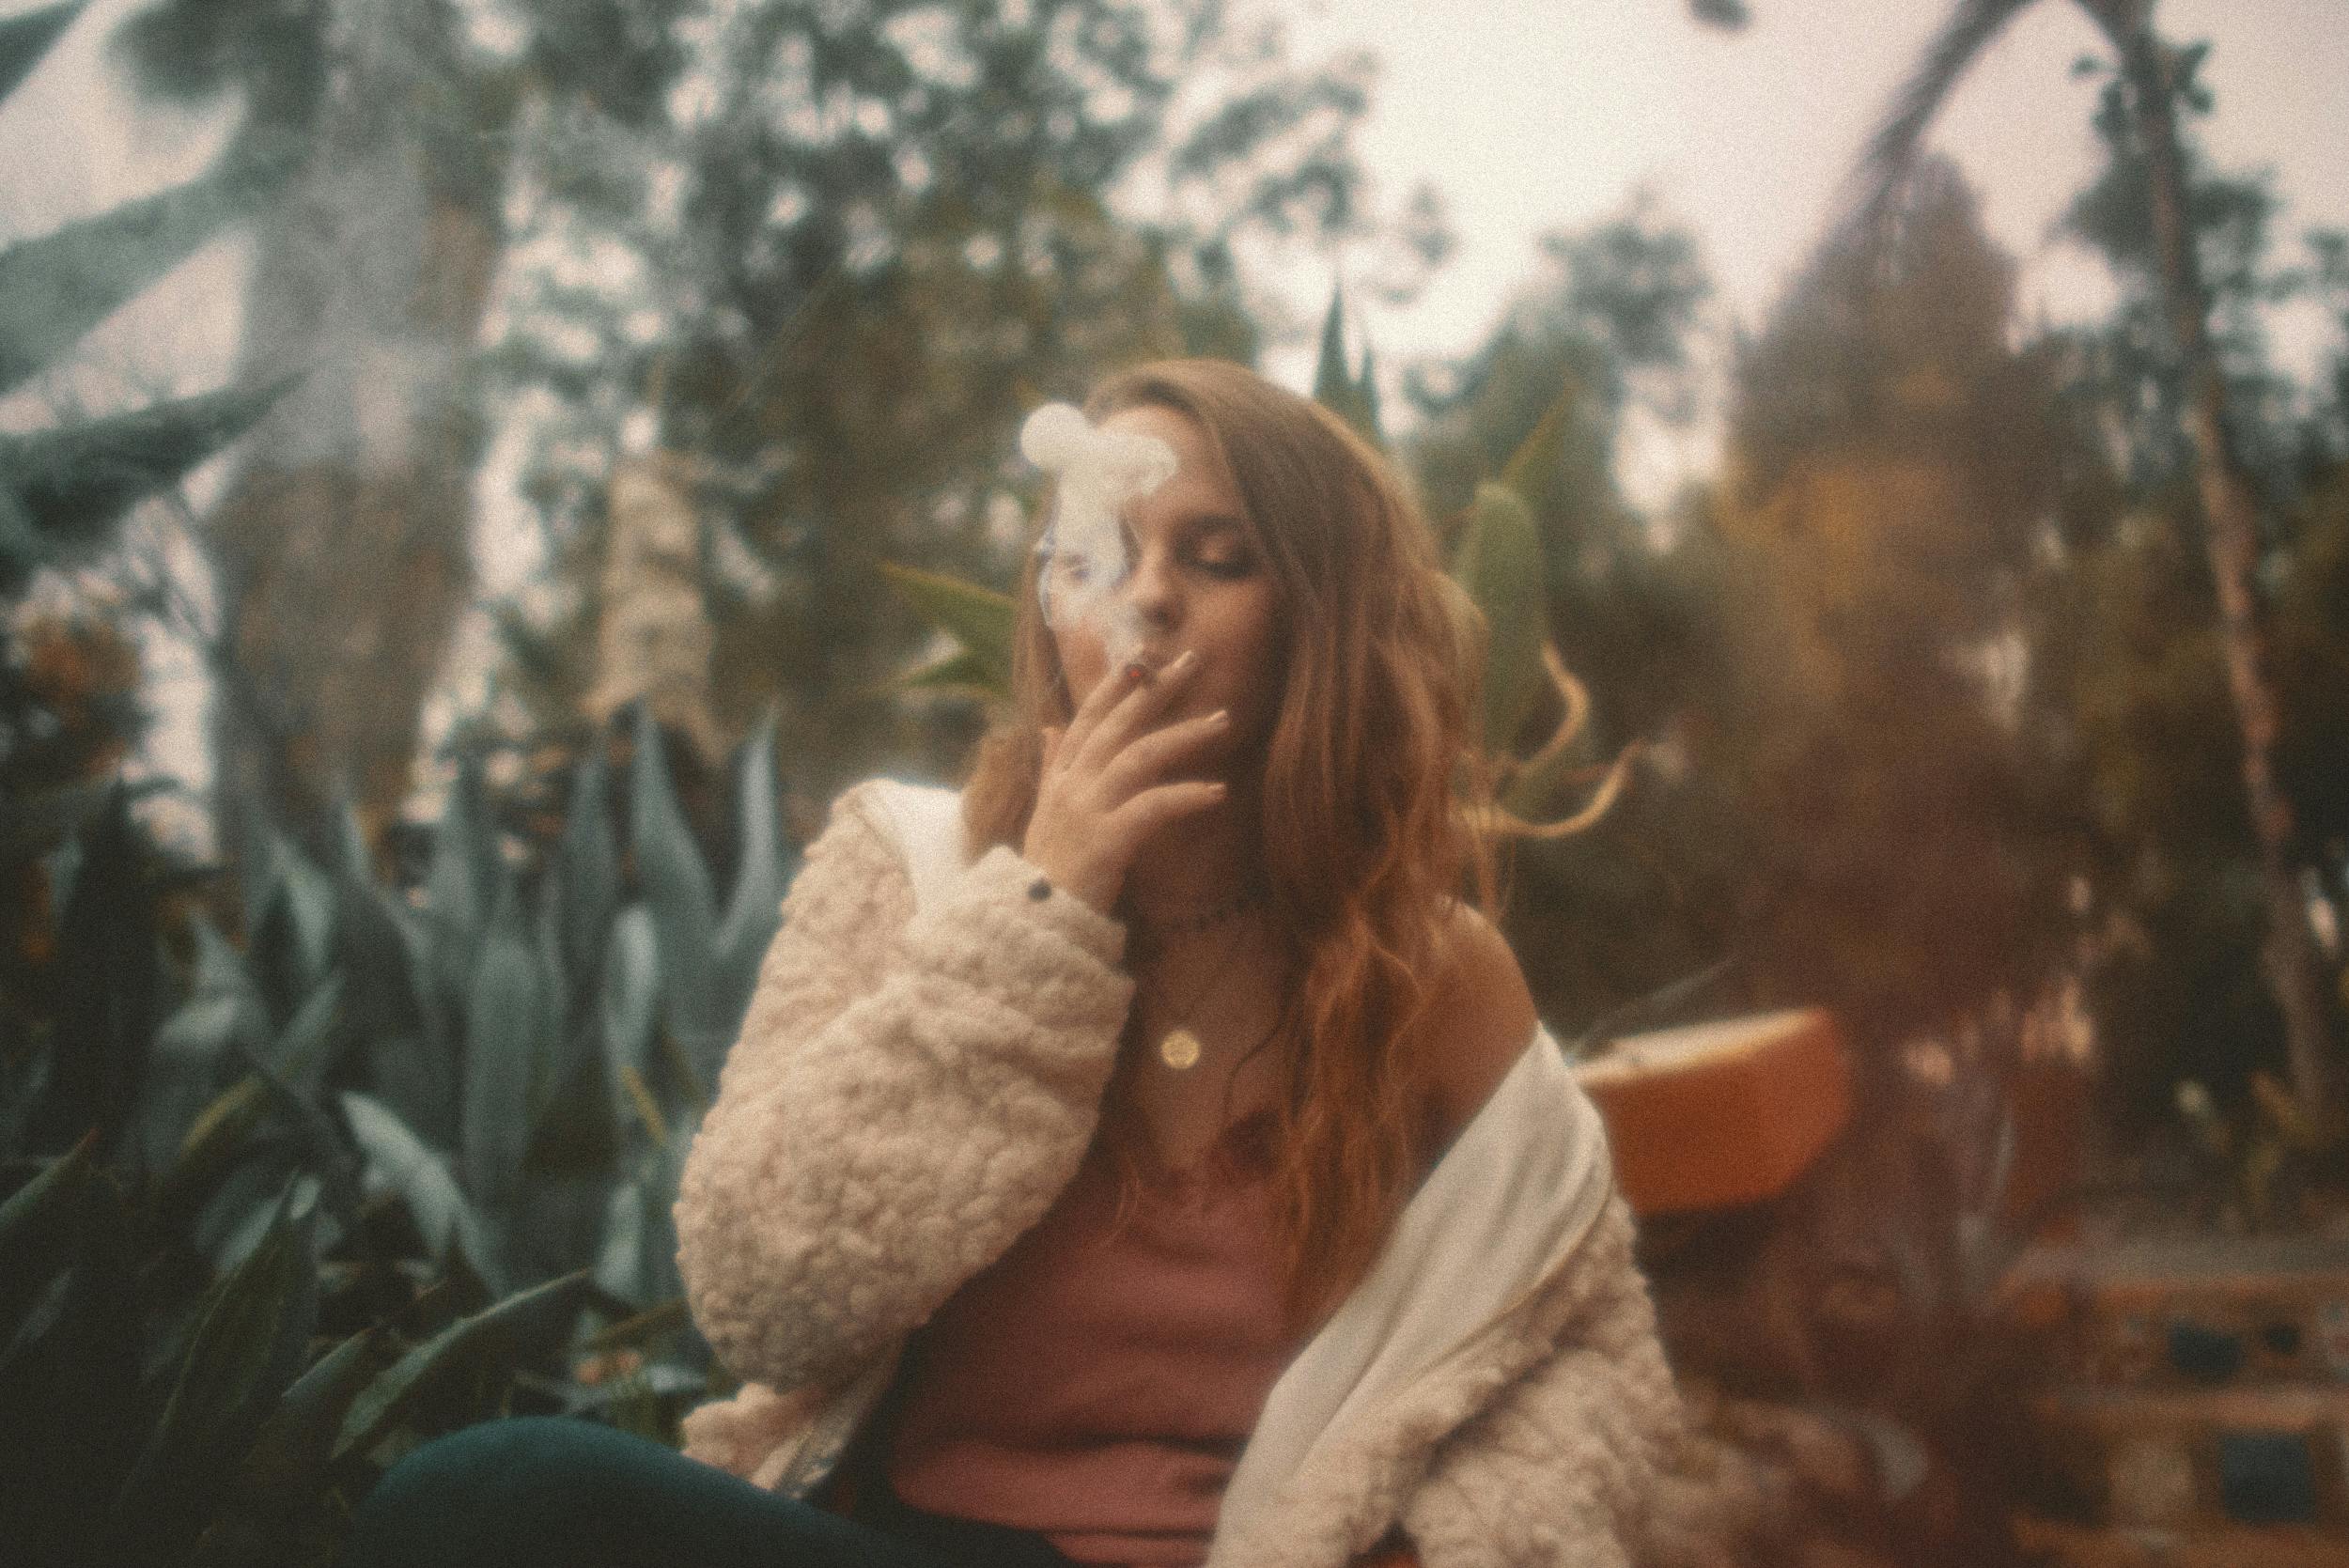 A woman smokes a joint rolled with one of the best kush strains